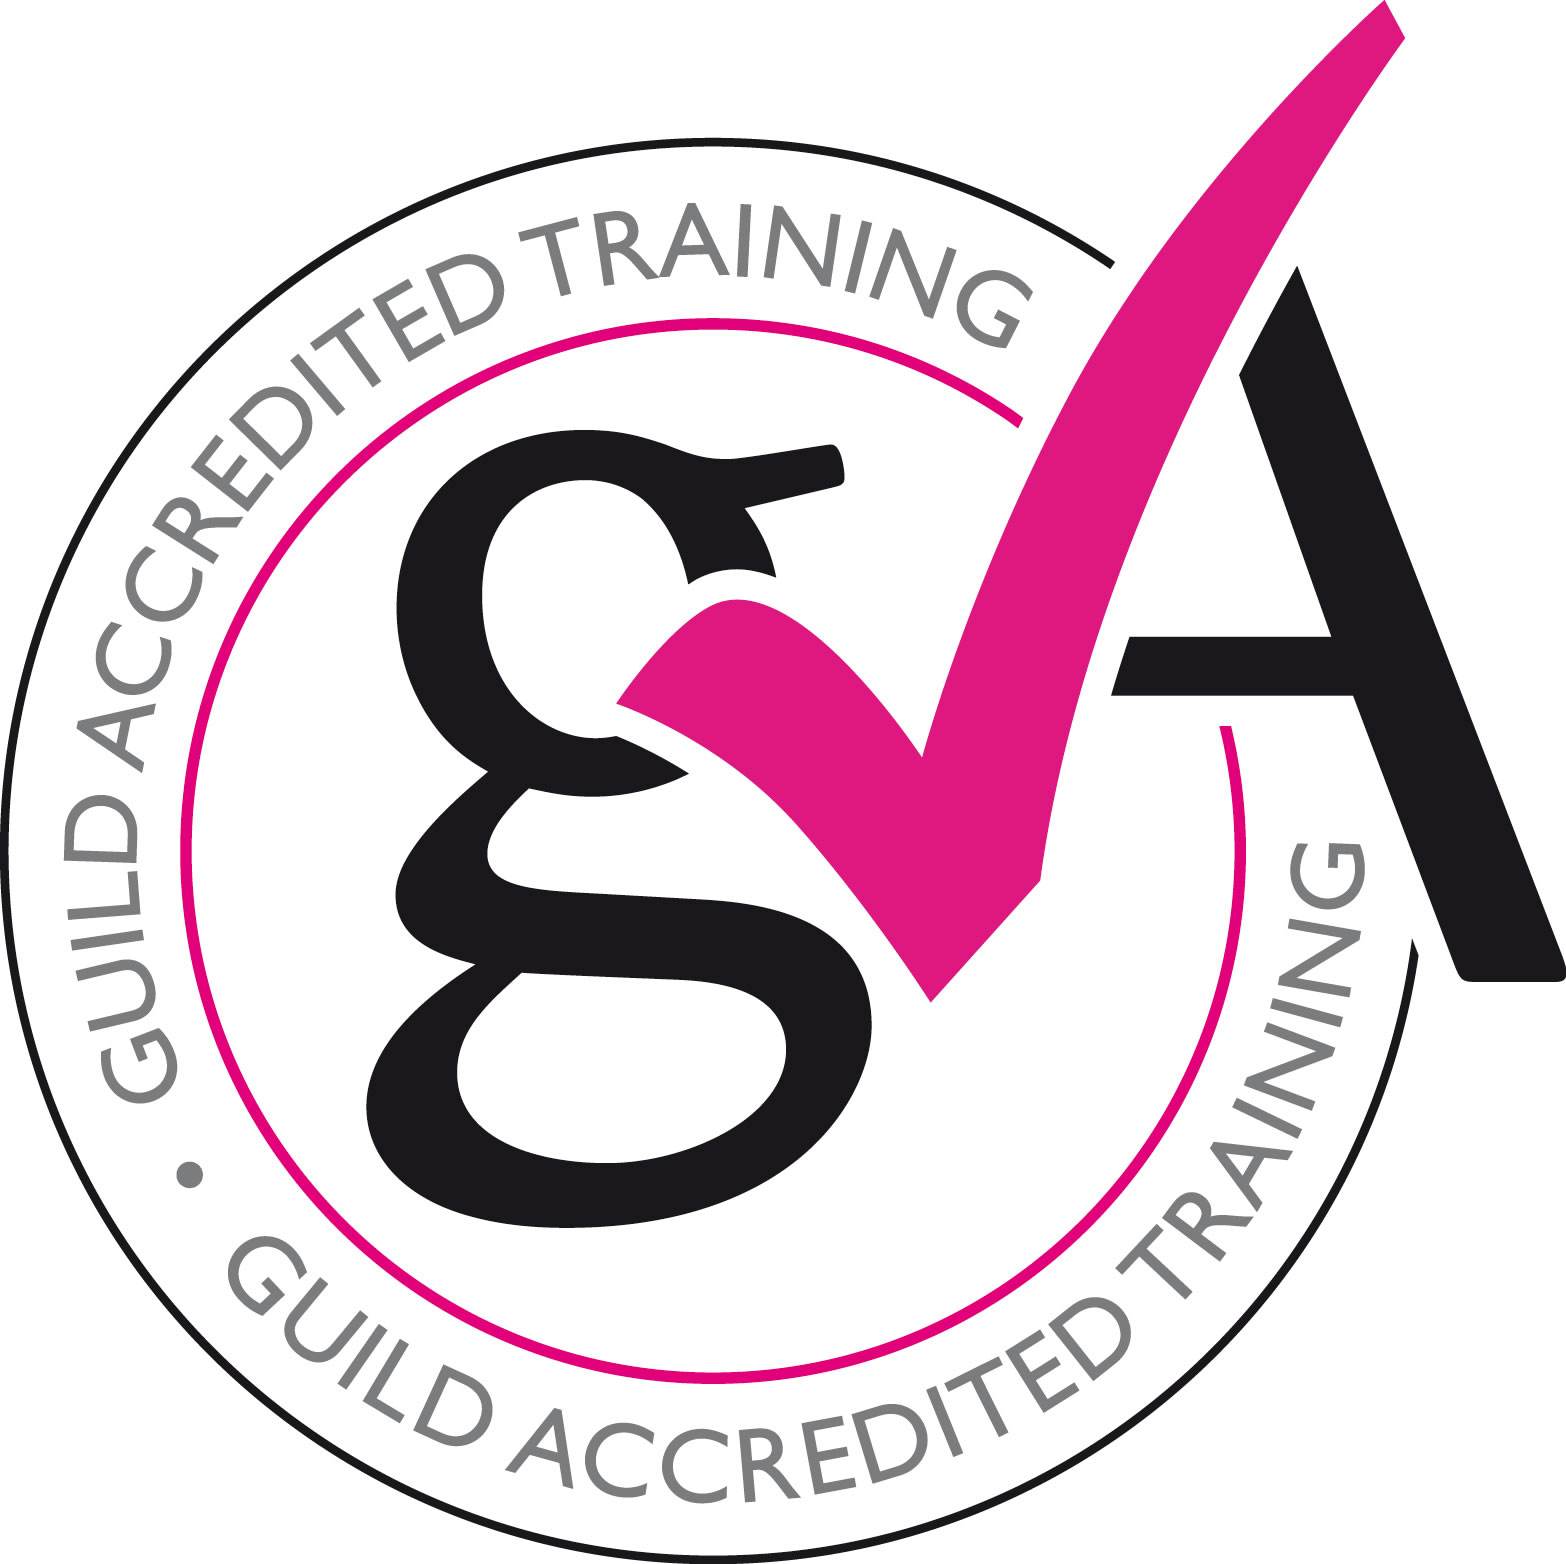 Guild accredited training